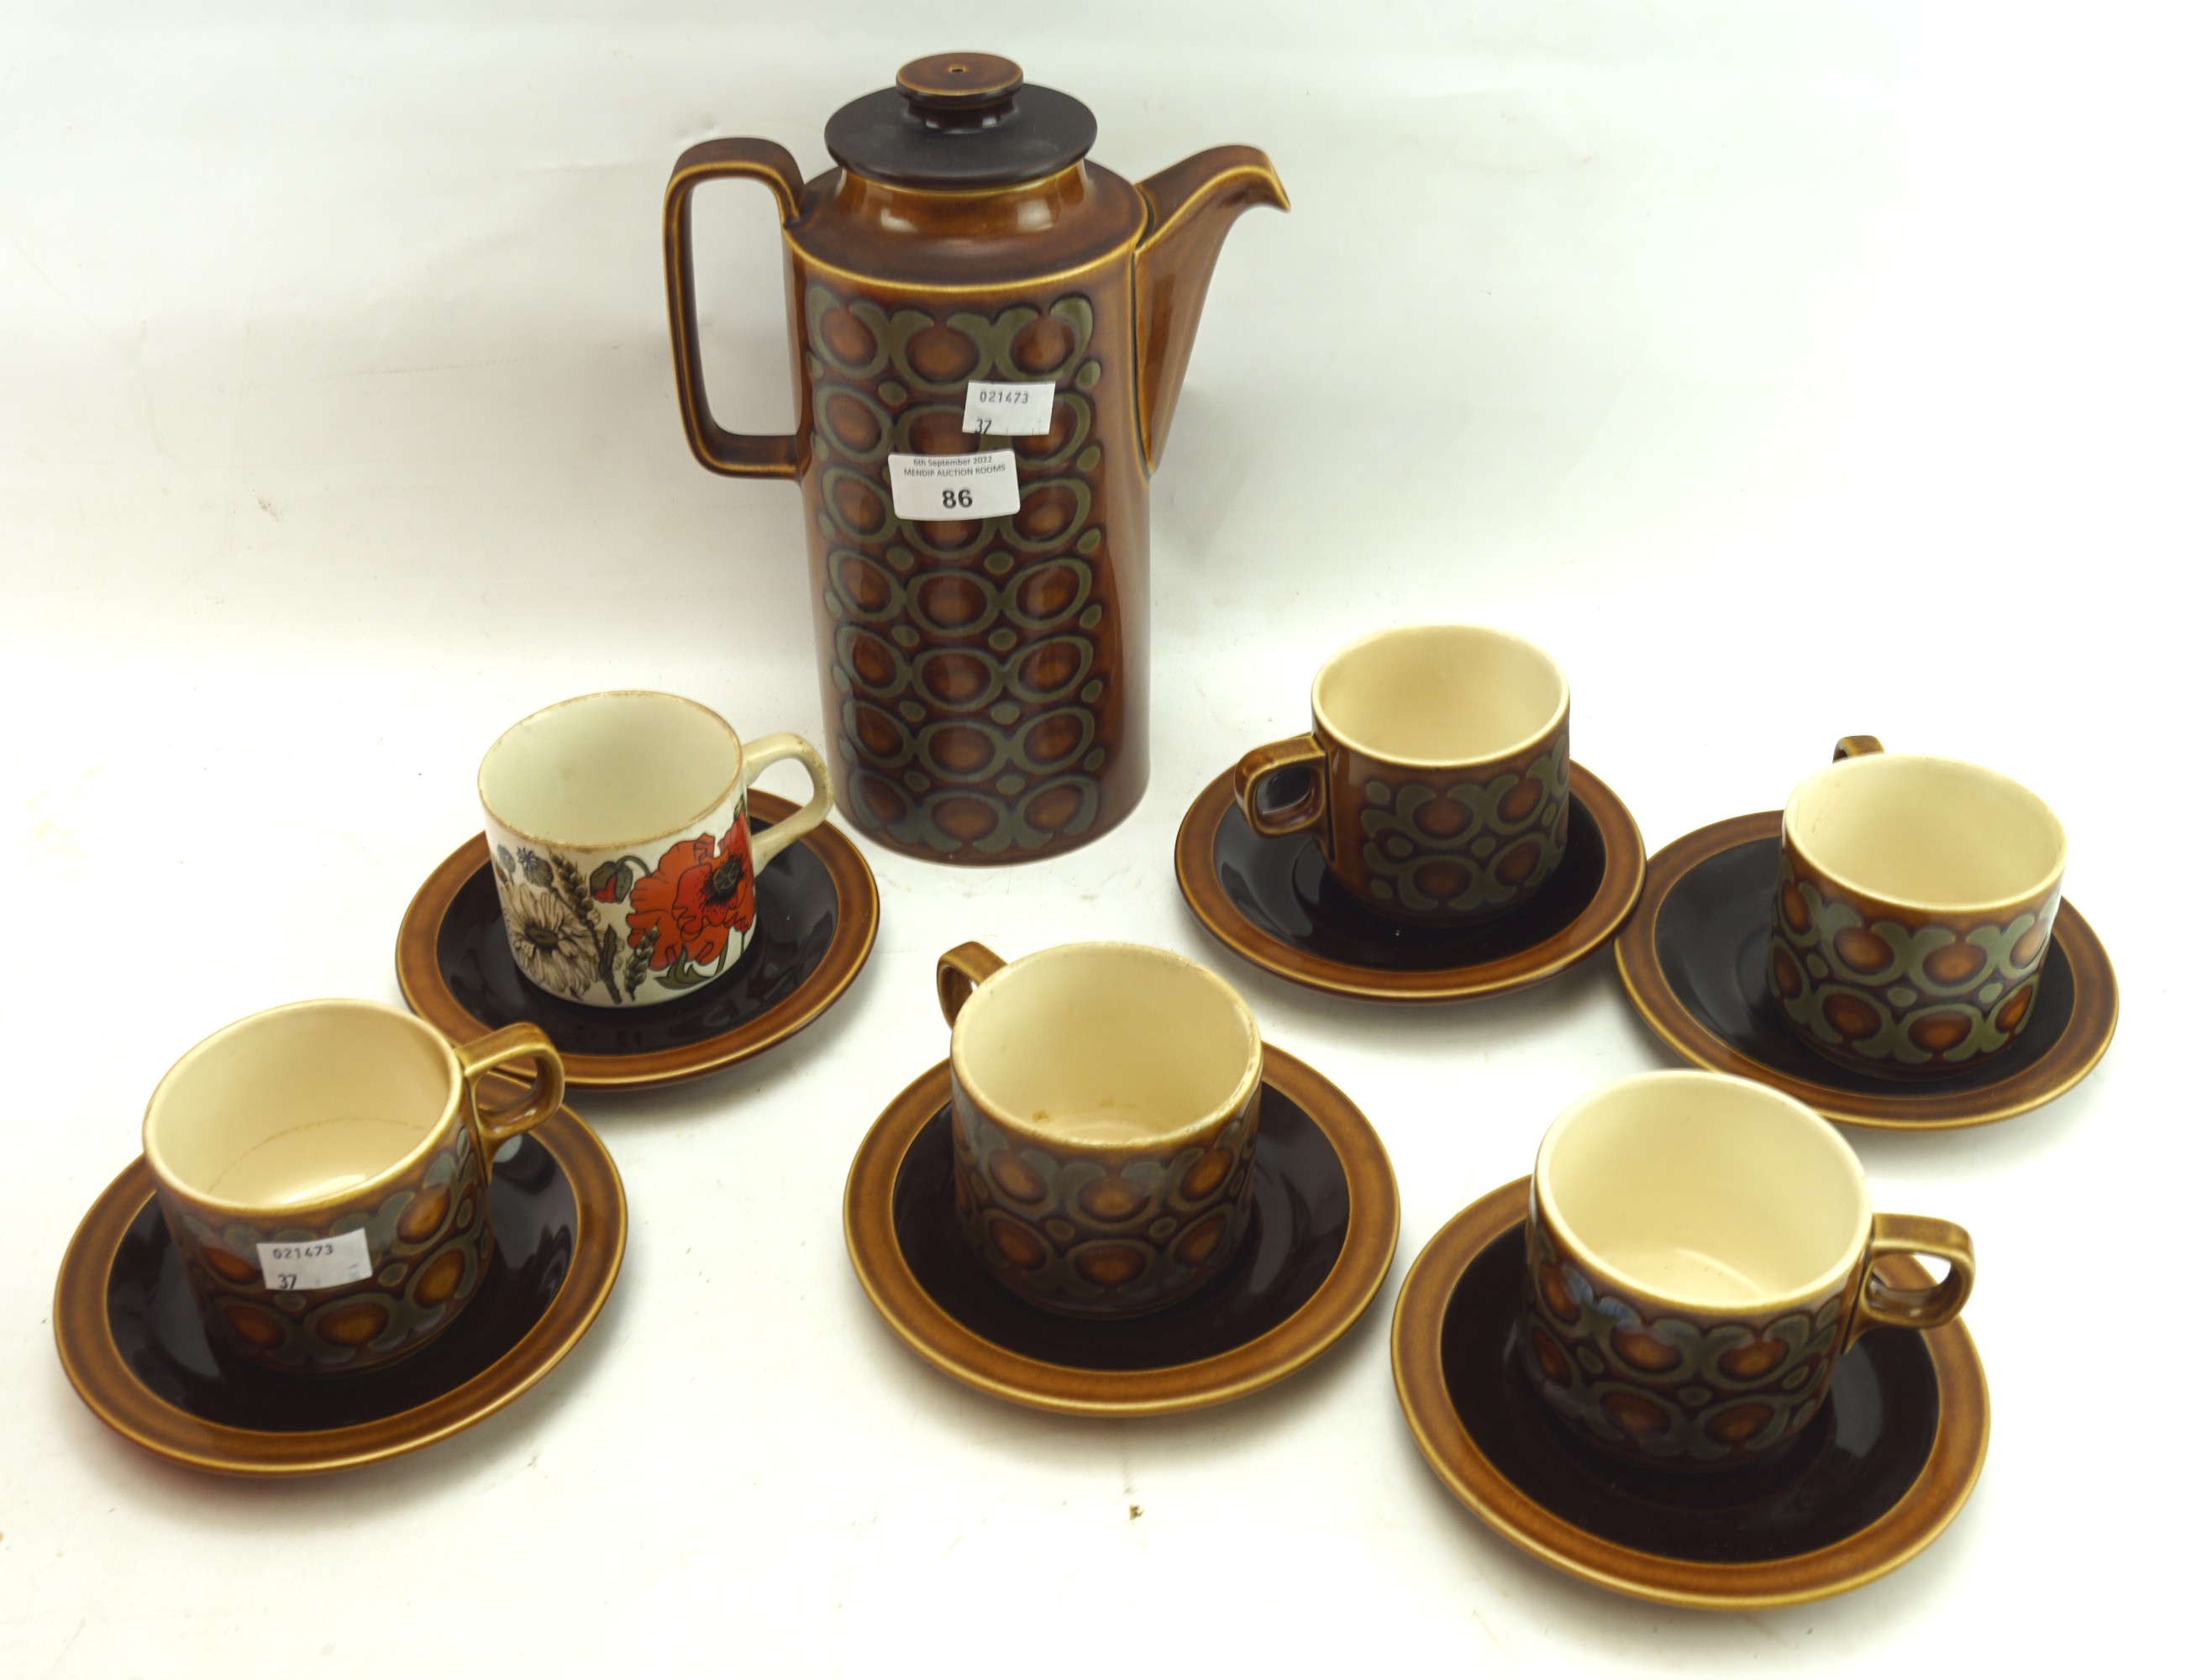 A Hornsea part coffee set in the 'Bronte' pattern.